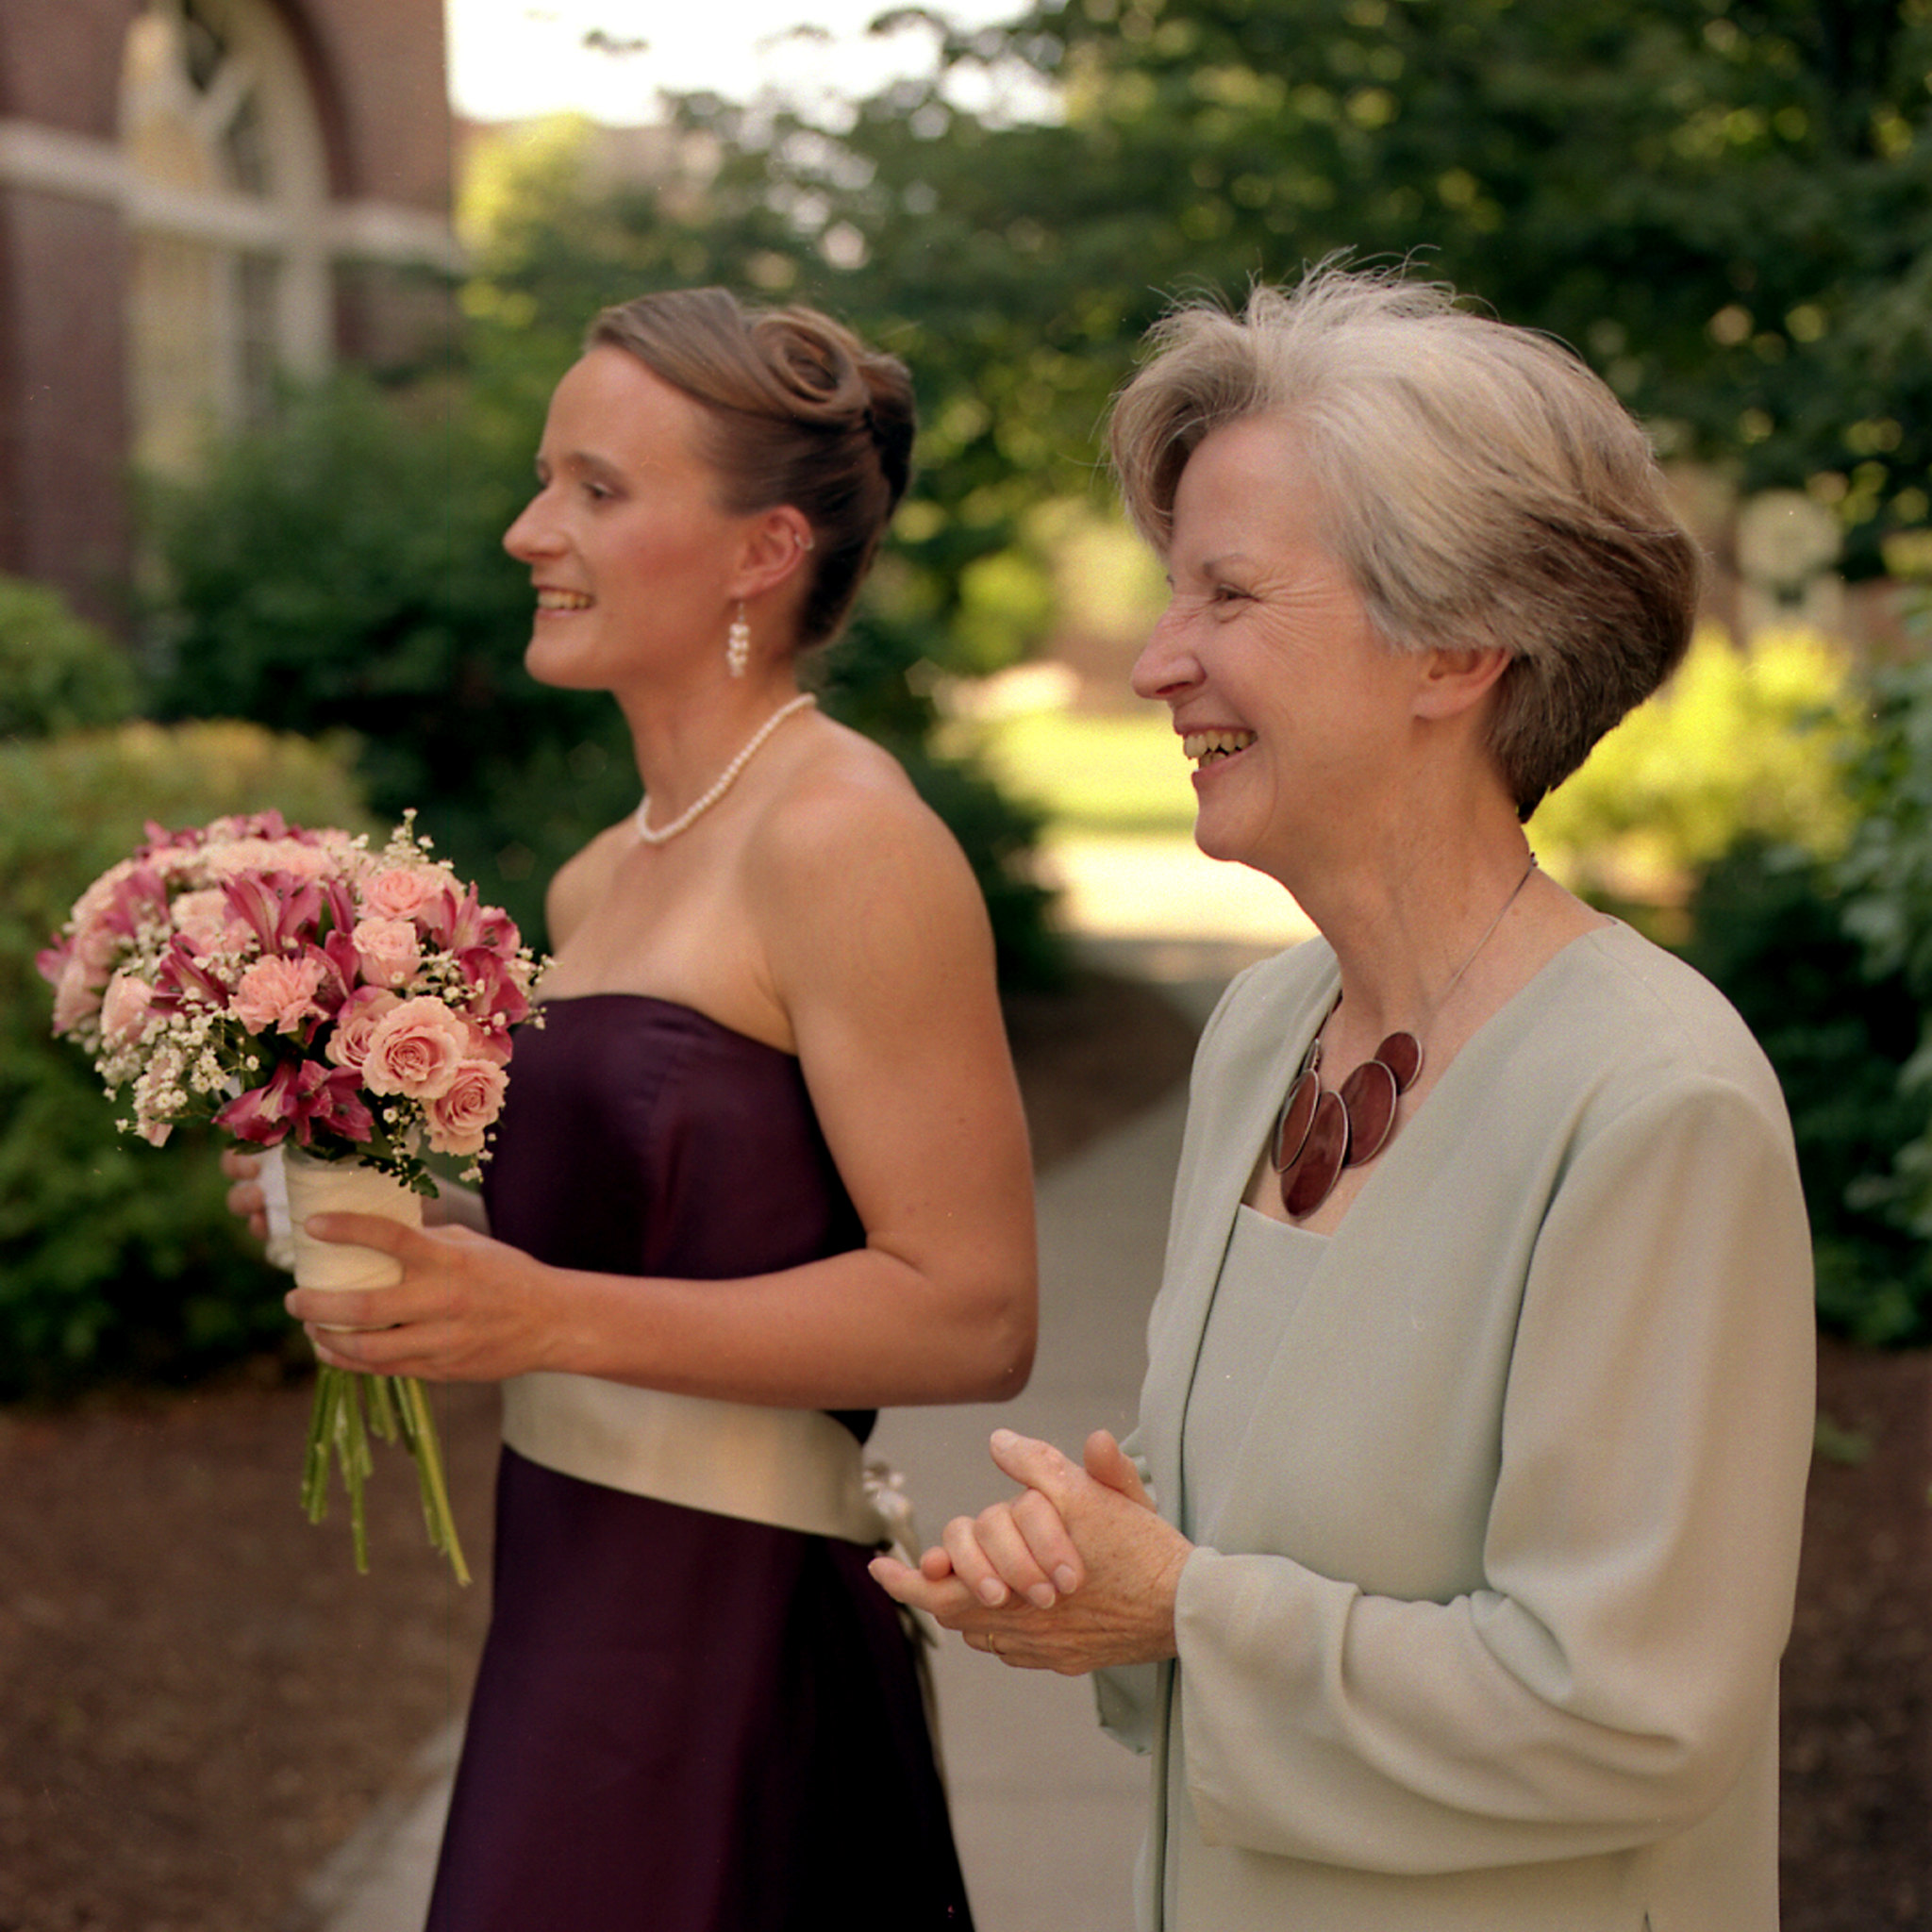 An older woman standing beside a woman with a bouquet | Source: flickr.com/mkromer